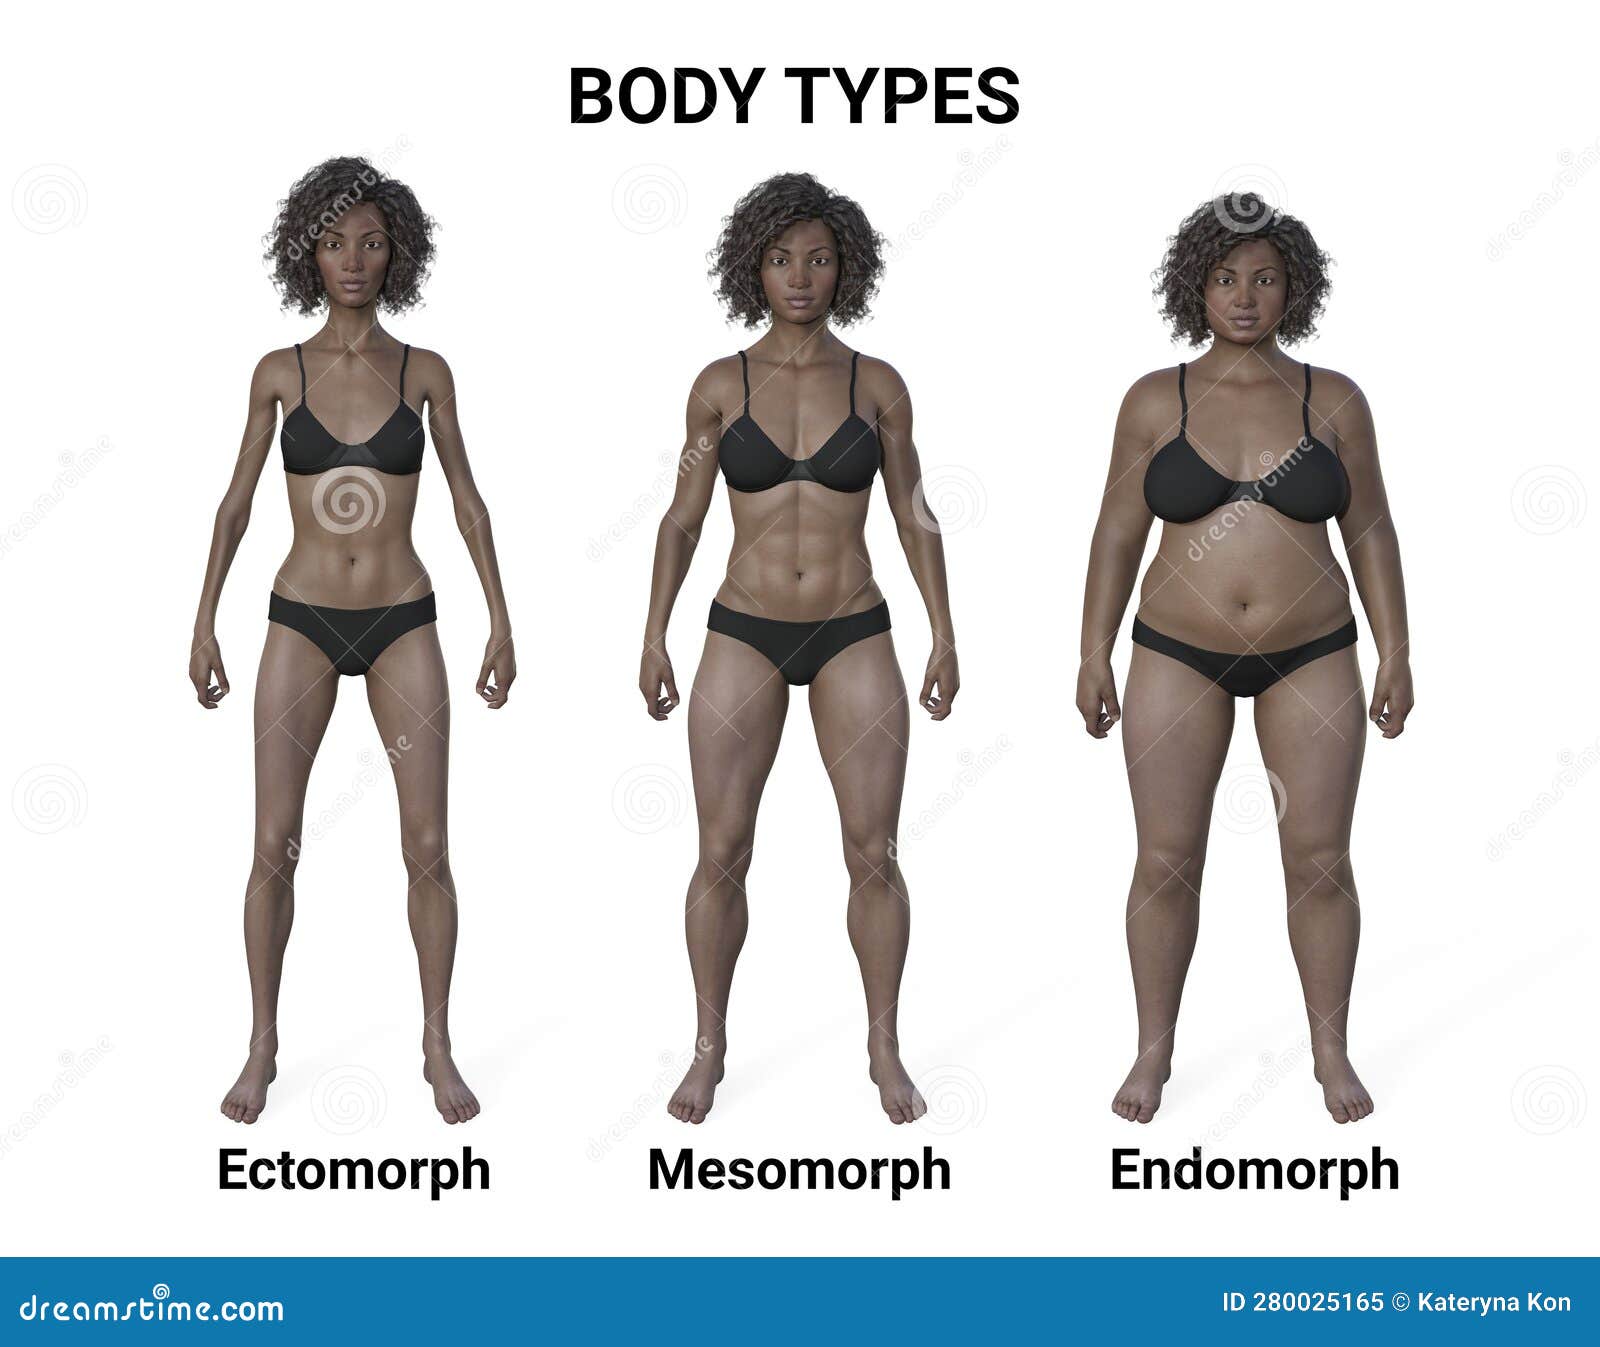 https://thumbs.dreamstime.com/z/d-illustration-female-body-showcasing-three-different-body-types-ectomorph-mesomorph-endomorph-d-illustration-280025165.jpg